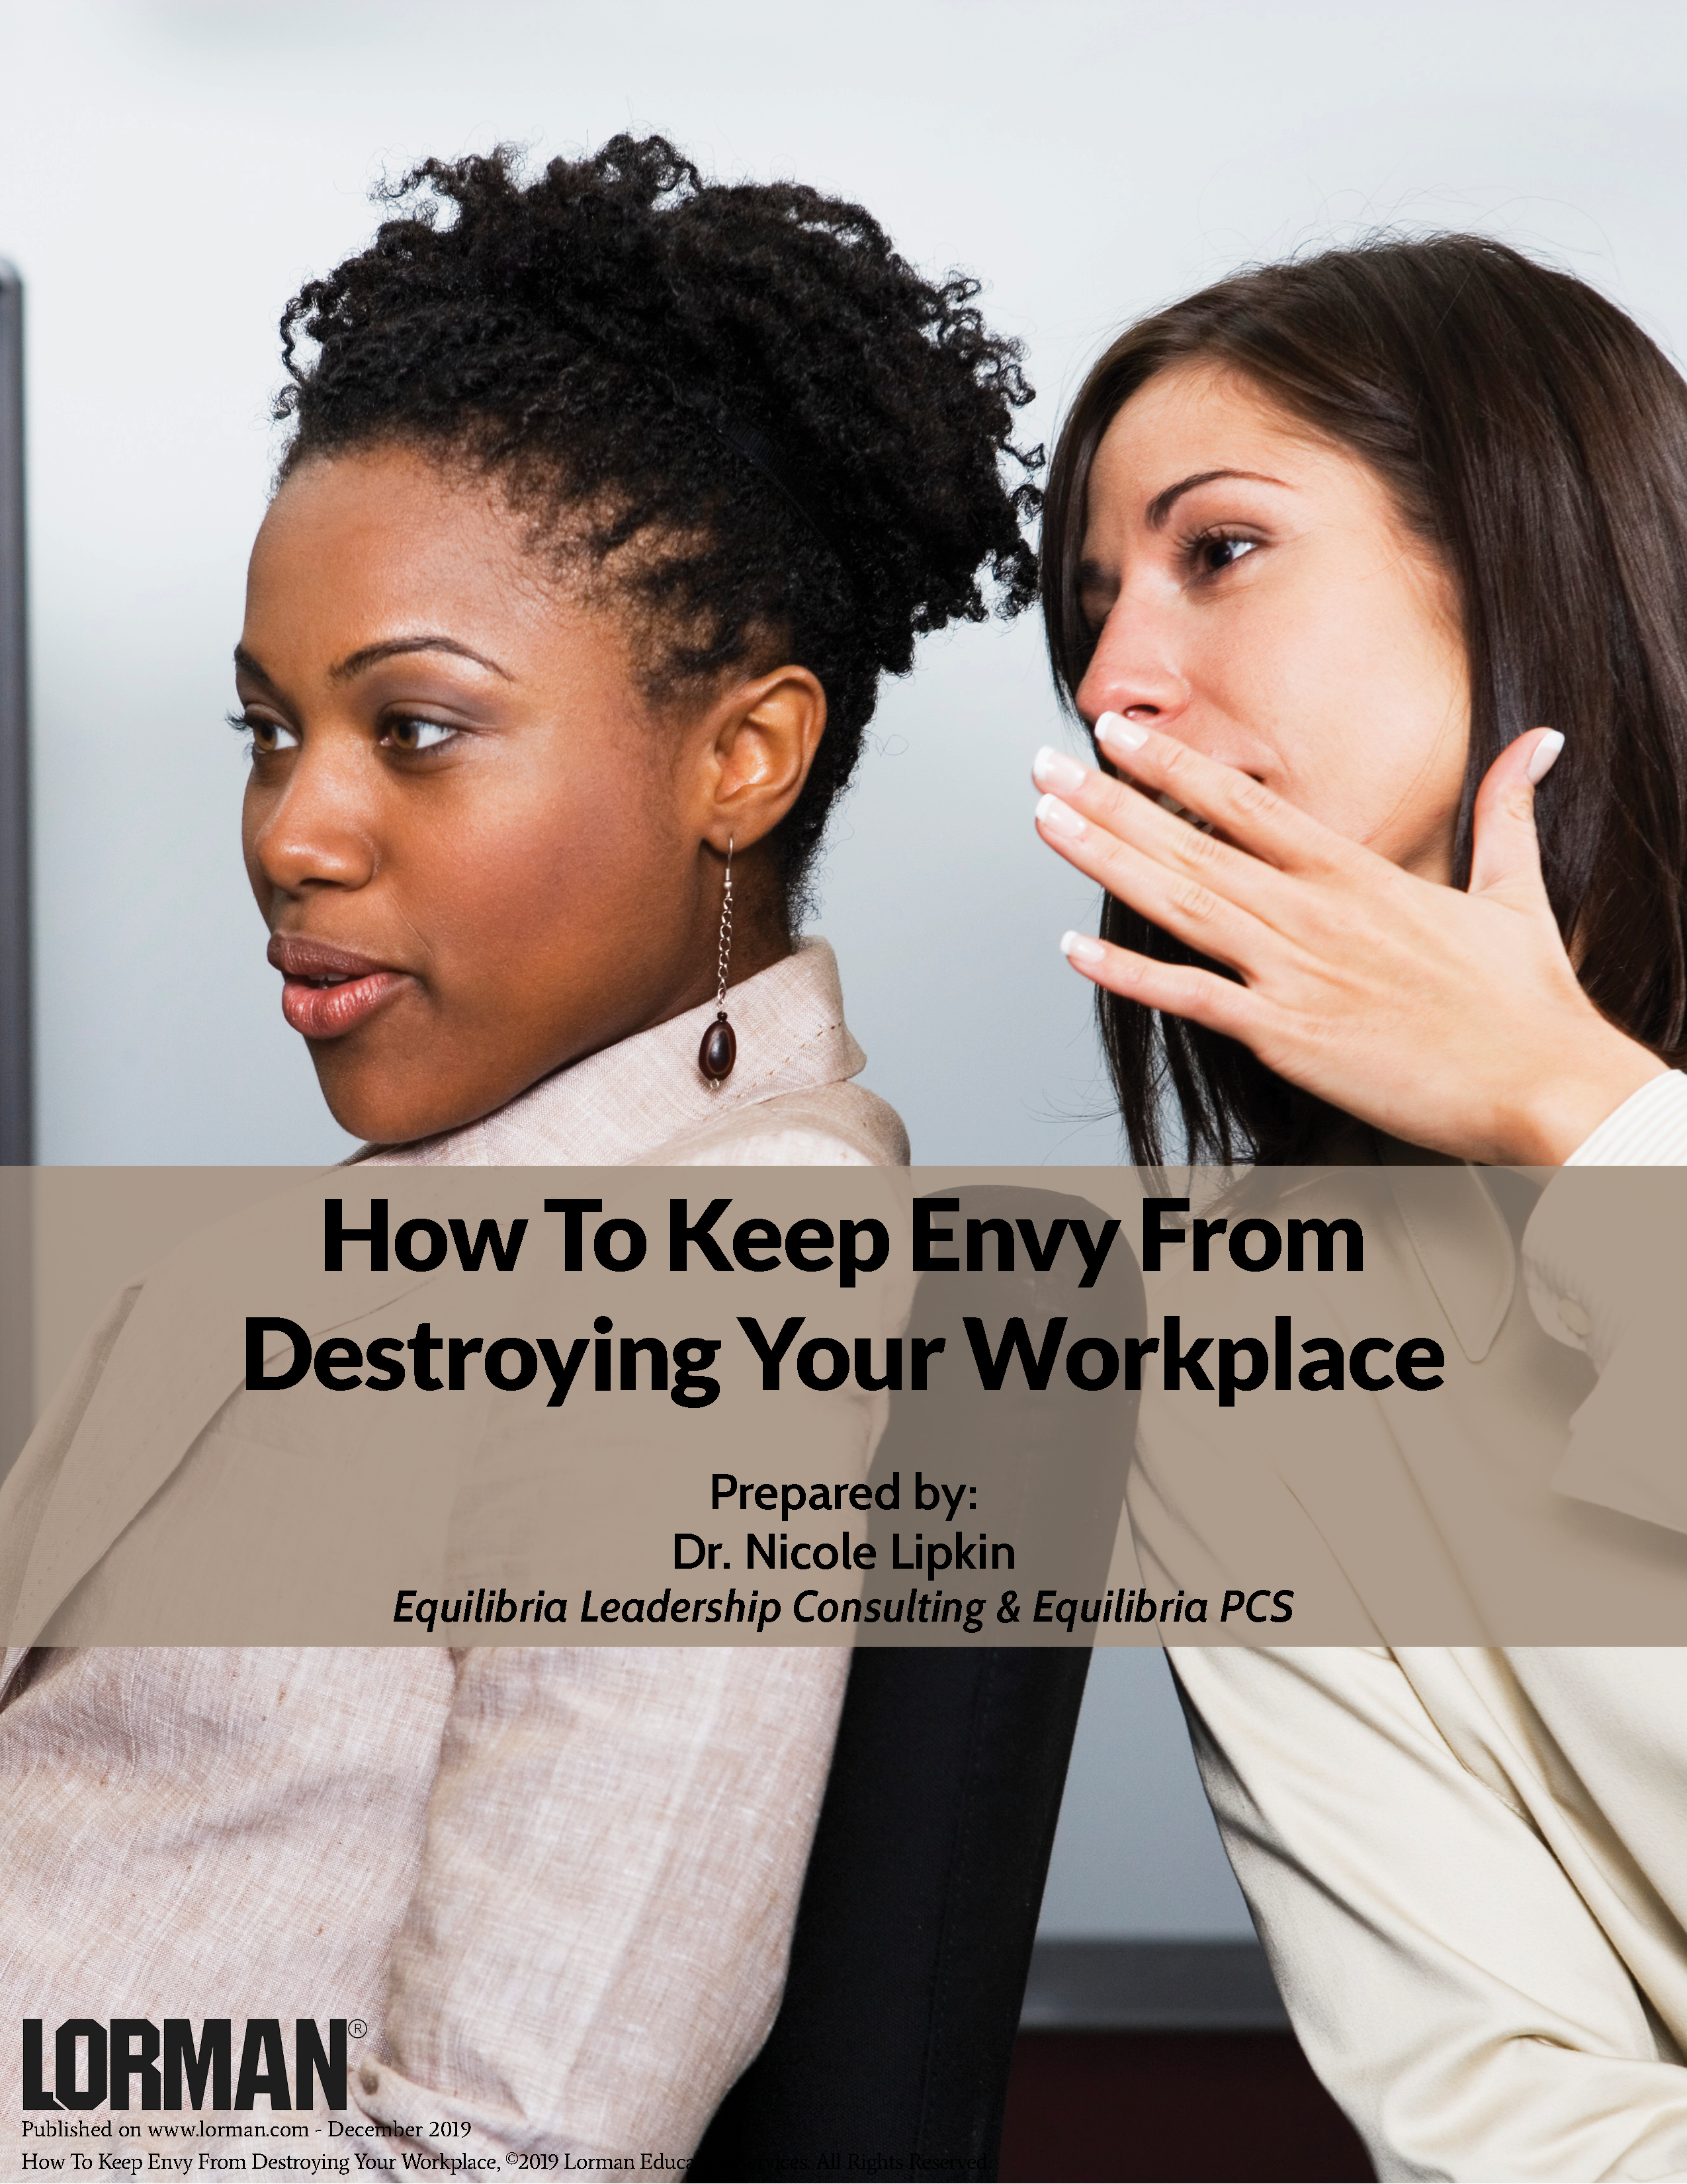 How To Keep Envy From Destroying Your Workplace